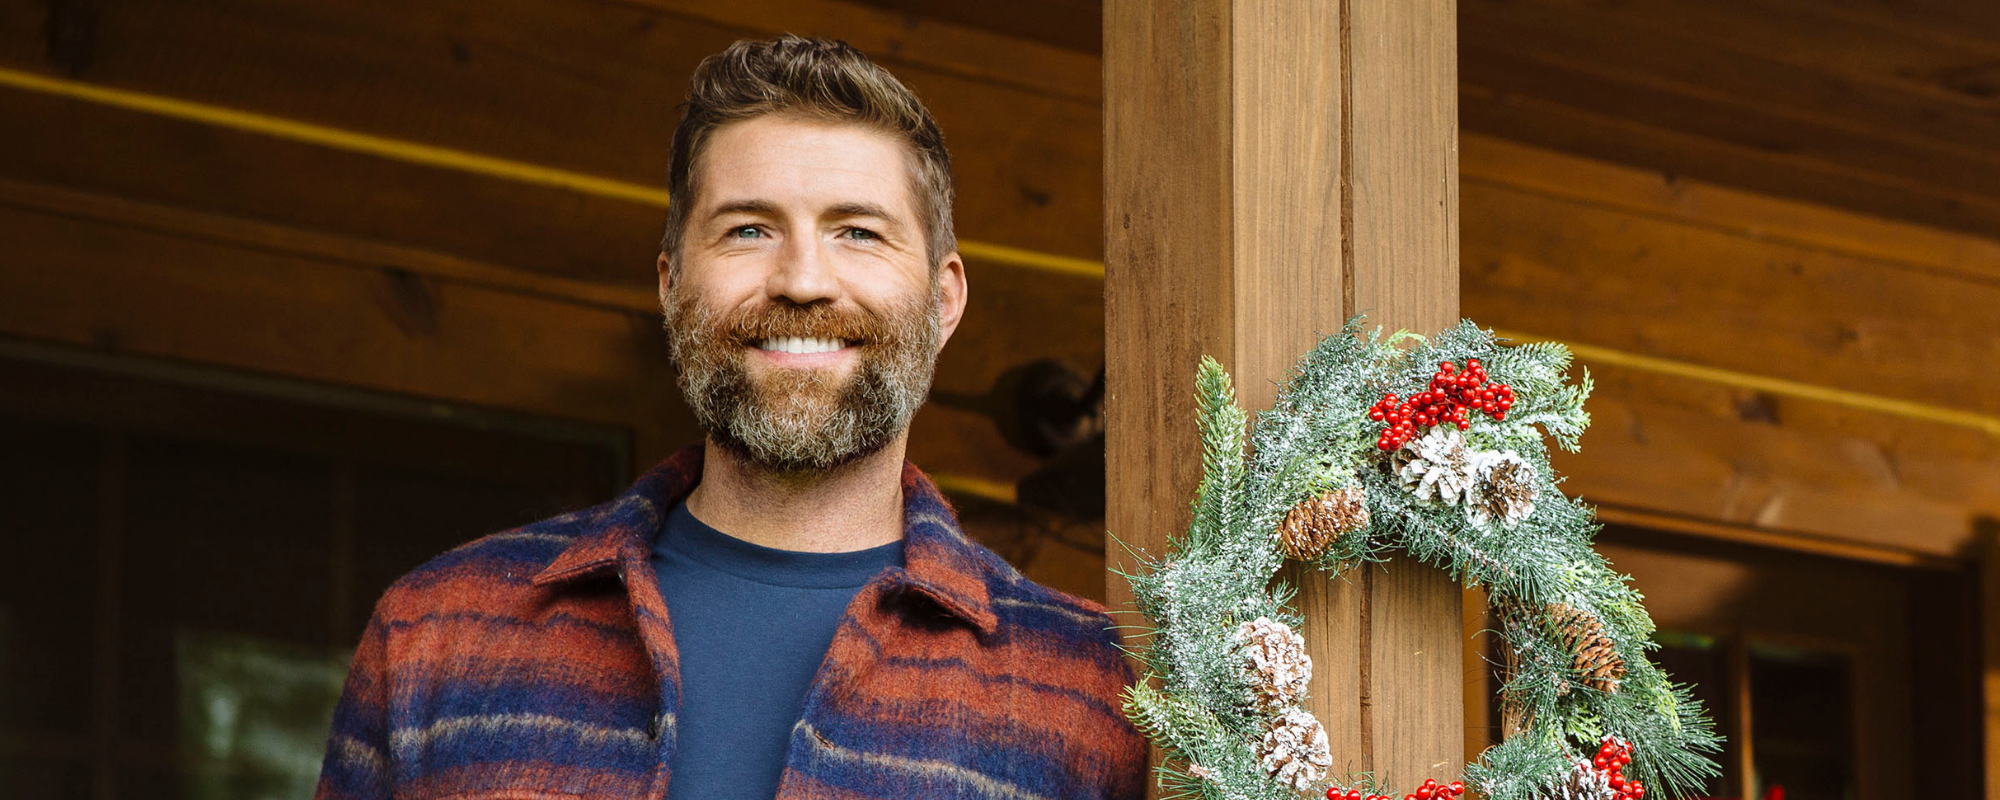 Josh Turner’s First Christmas Collection ‘King Size Manger’ Upholds the Reason For the Season